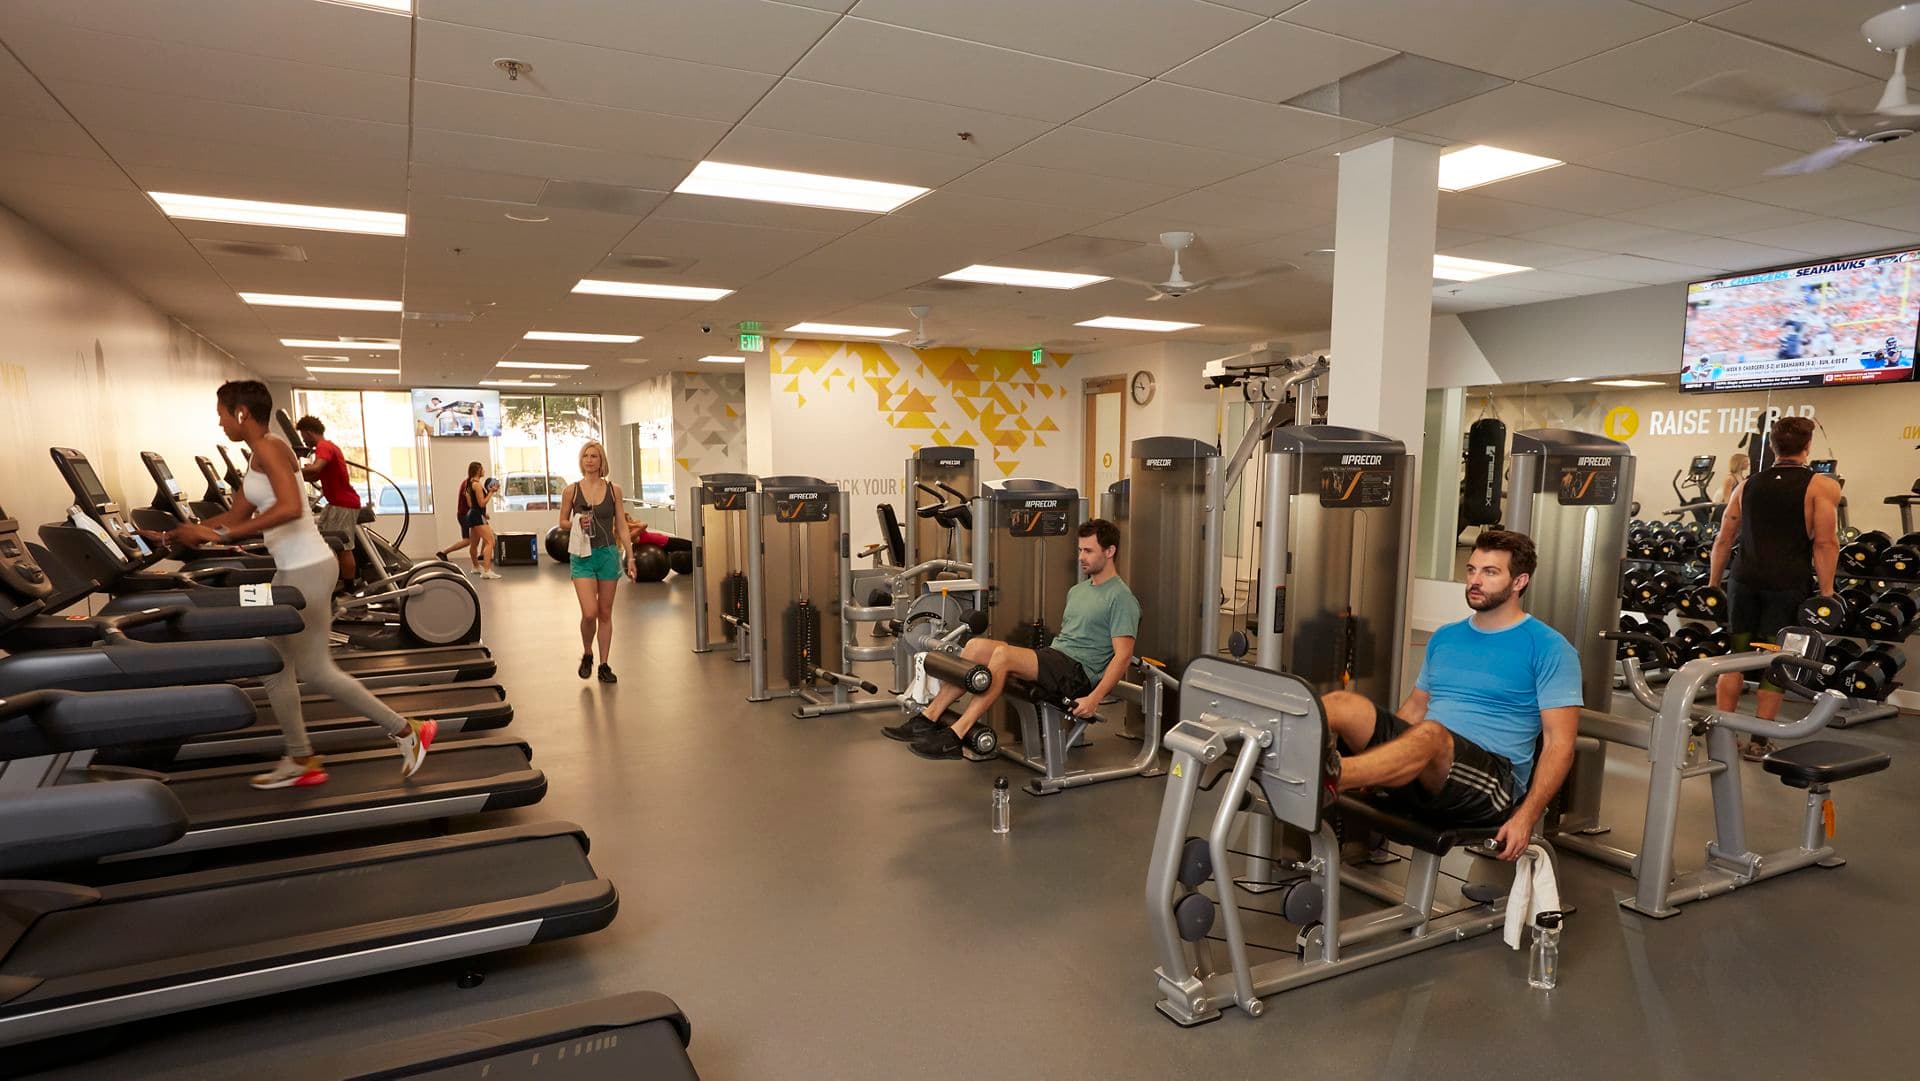 Photography of the KINETIC fitness center at Market Place Center in Irvine, CA